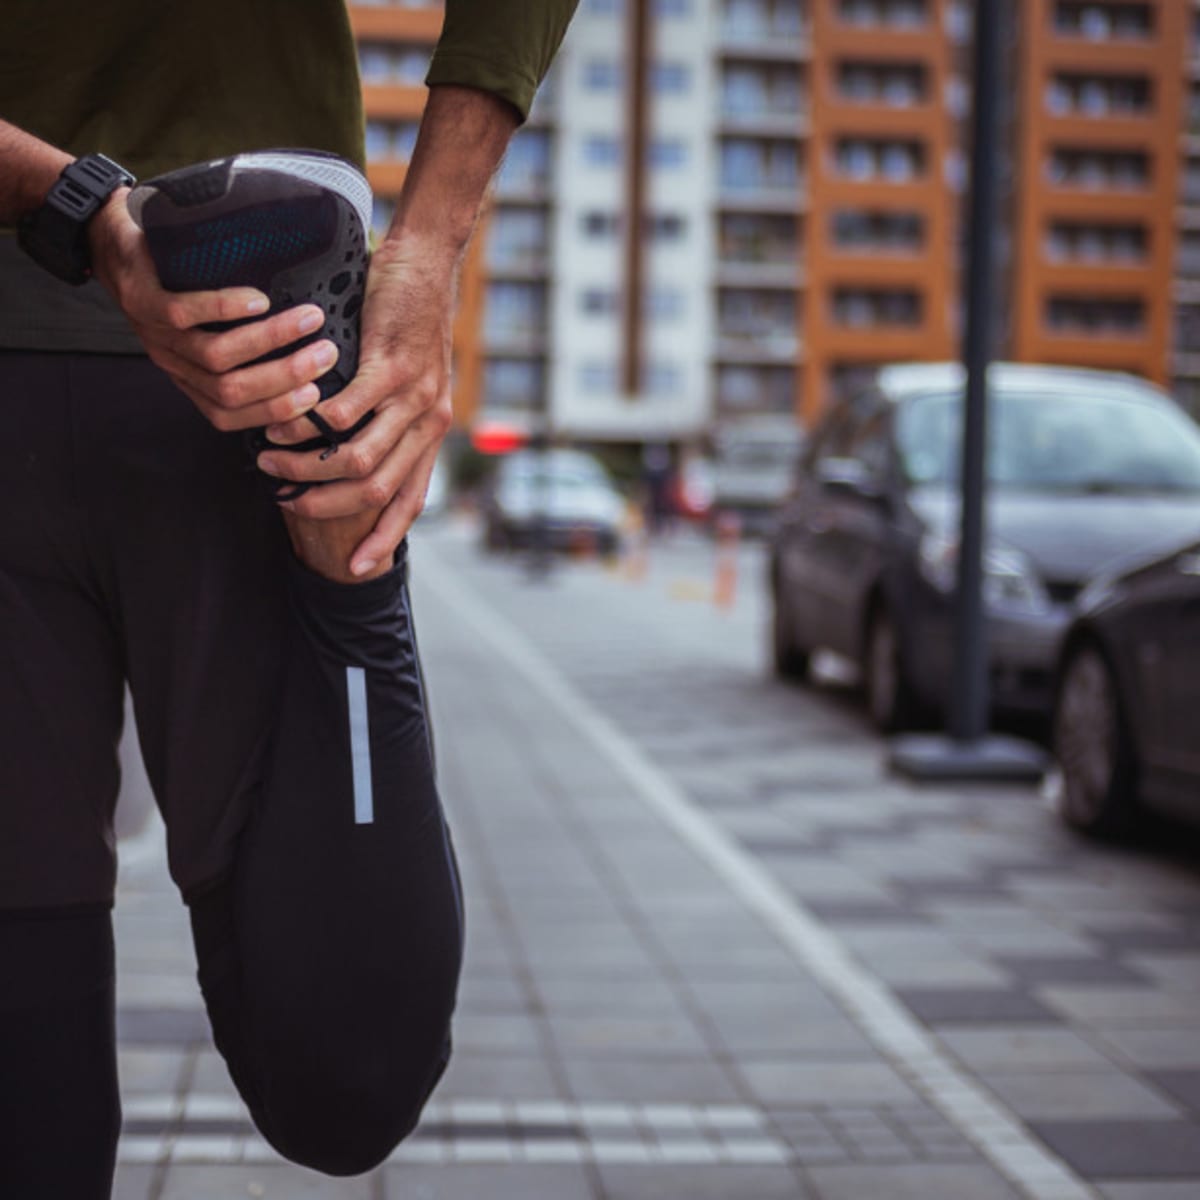 BALEAF's $30 cozy cotton sweatpants are proving perfect for winter workouts